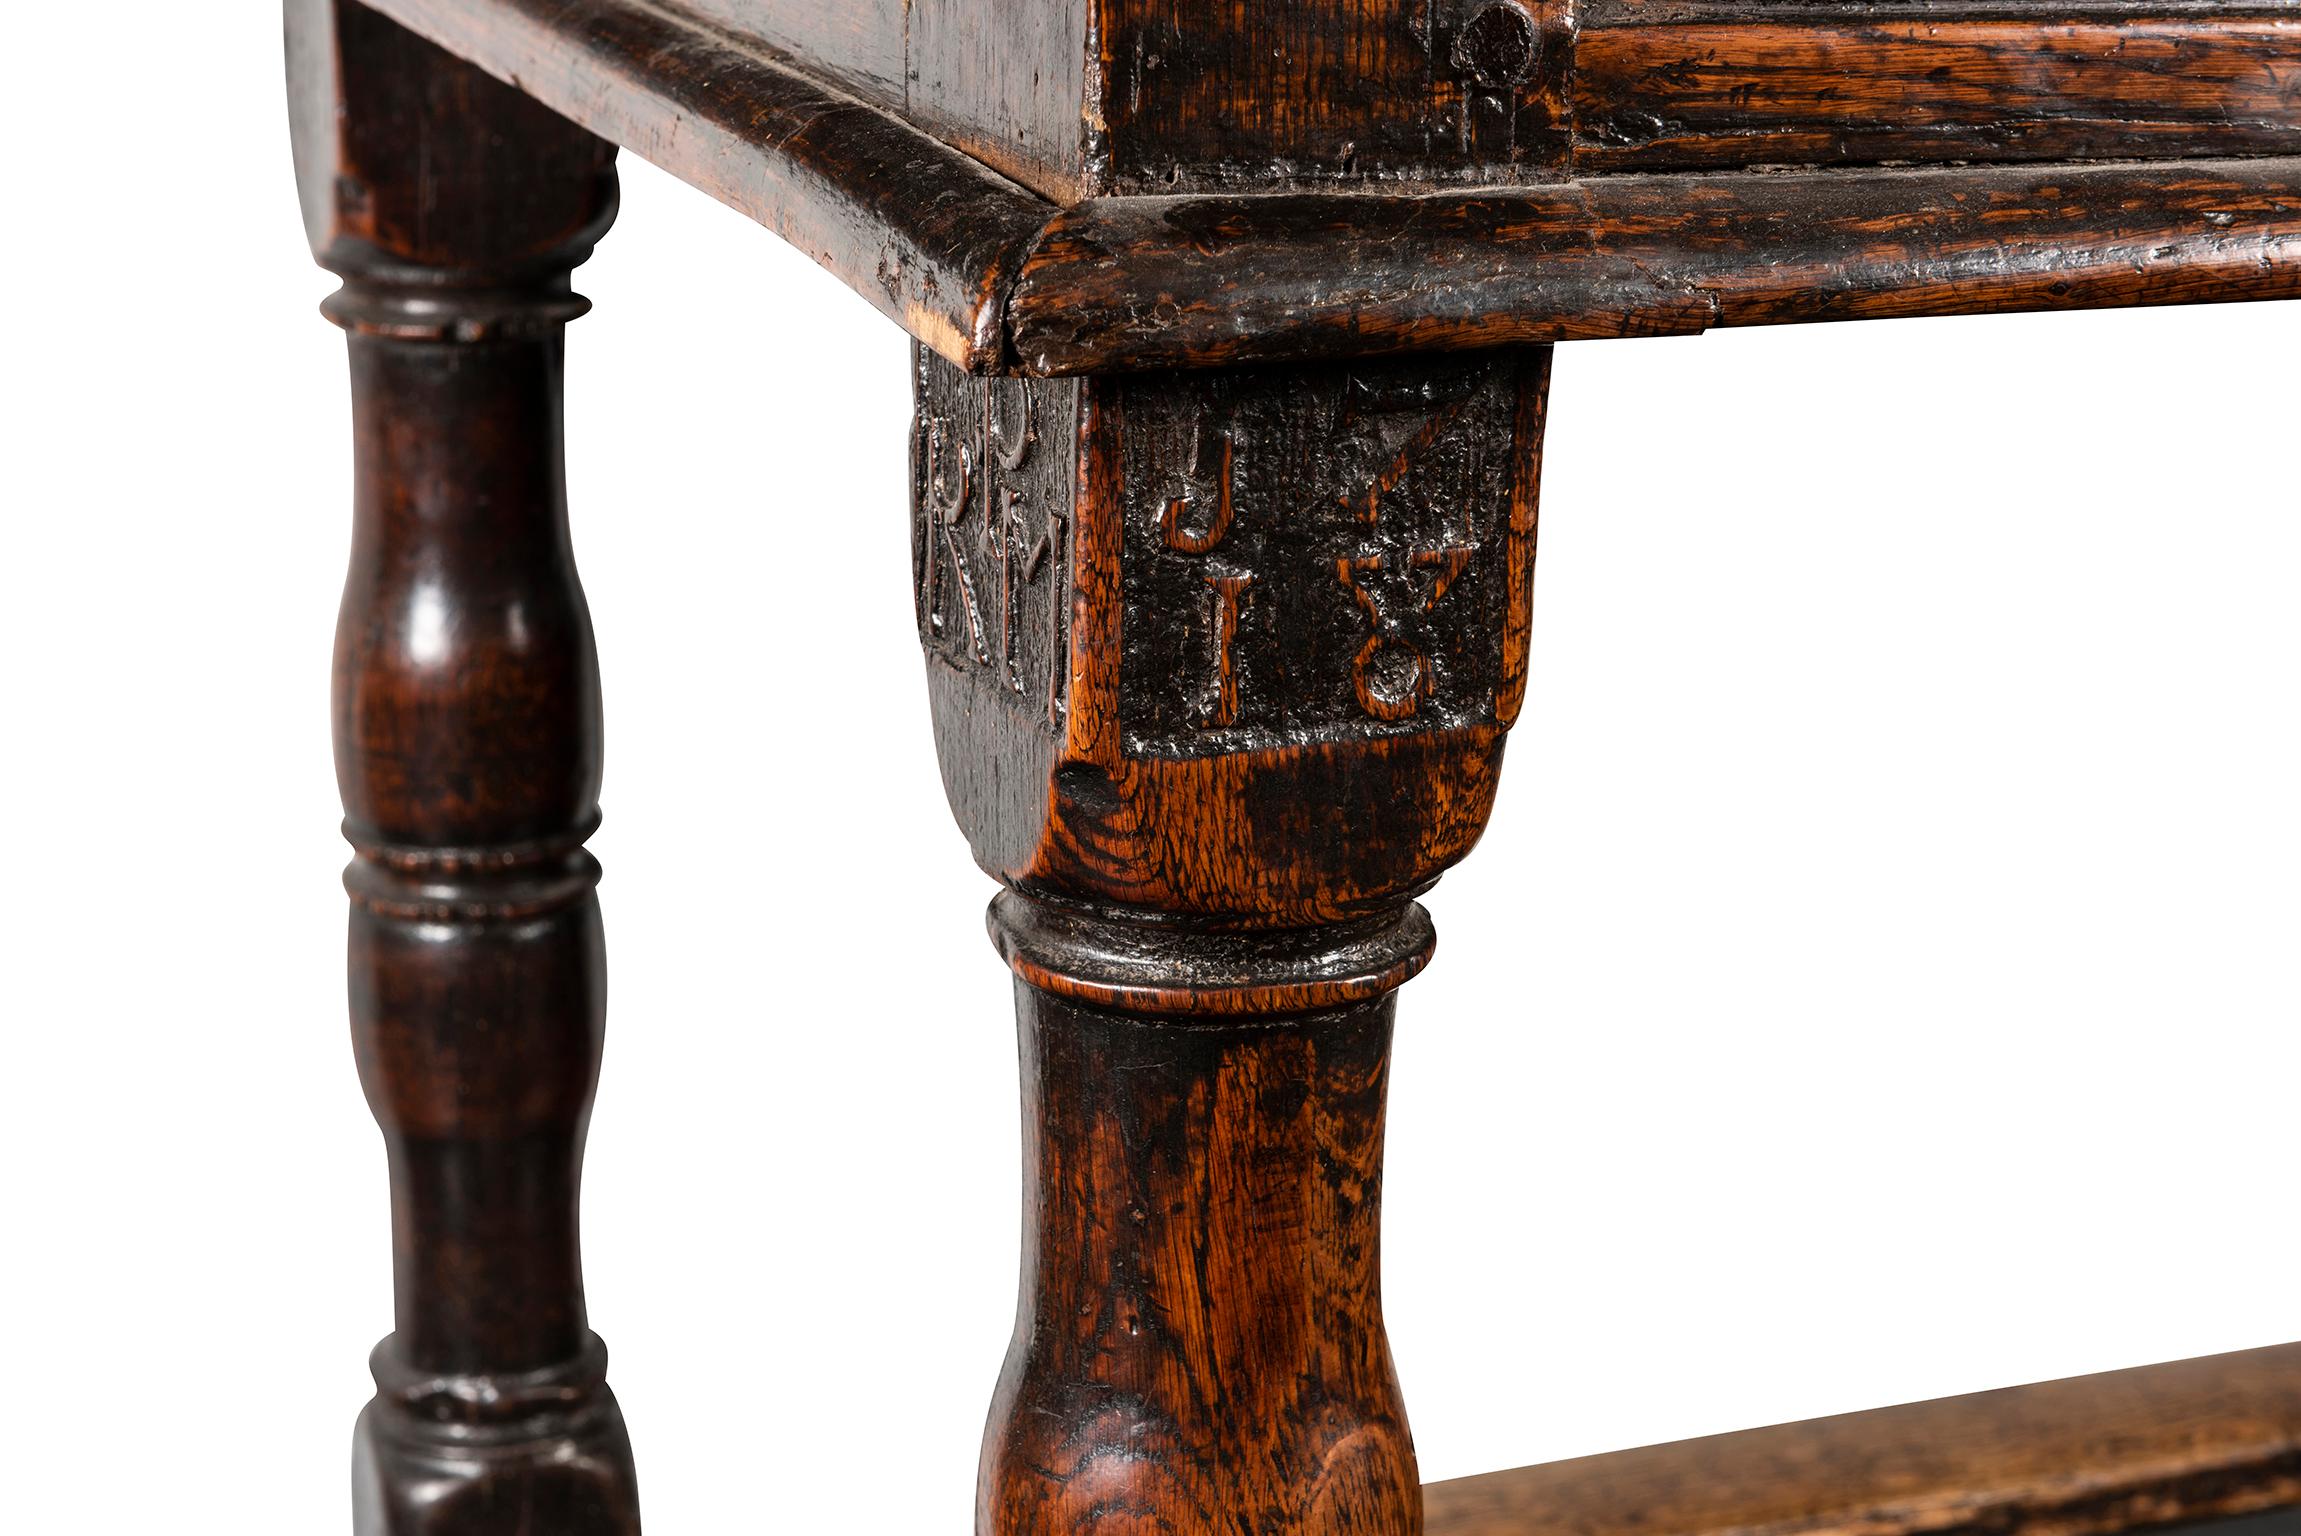 The plank top with butt ends over a recessed blank frieze supported by four turned legs and united by chamfered horizontal stretchers, carving to the capital of one leg 'RPM' and 'J718' dating the table to 1718.

Provenance: Mentmore Castle,